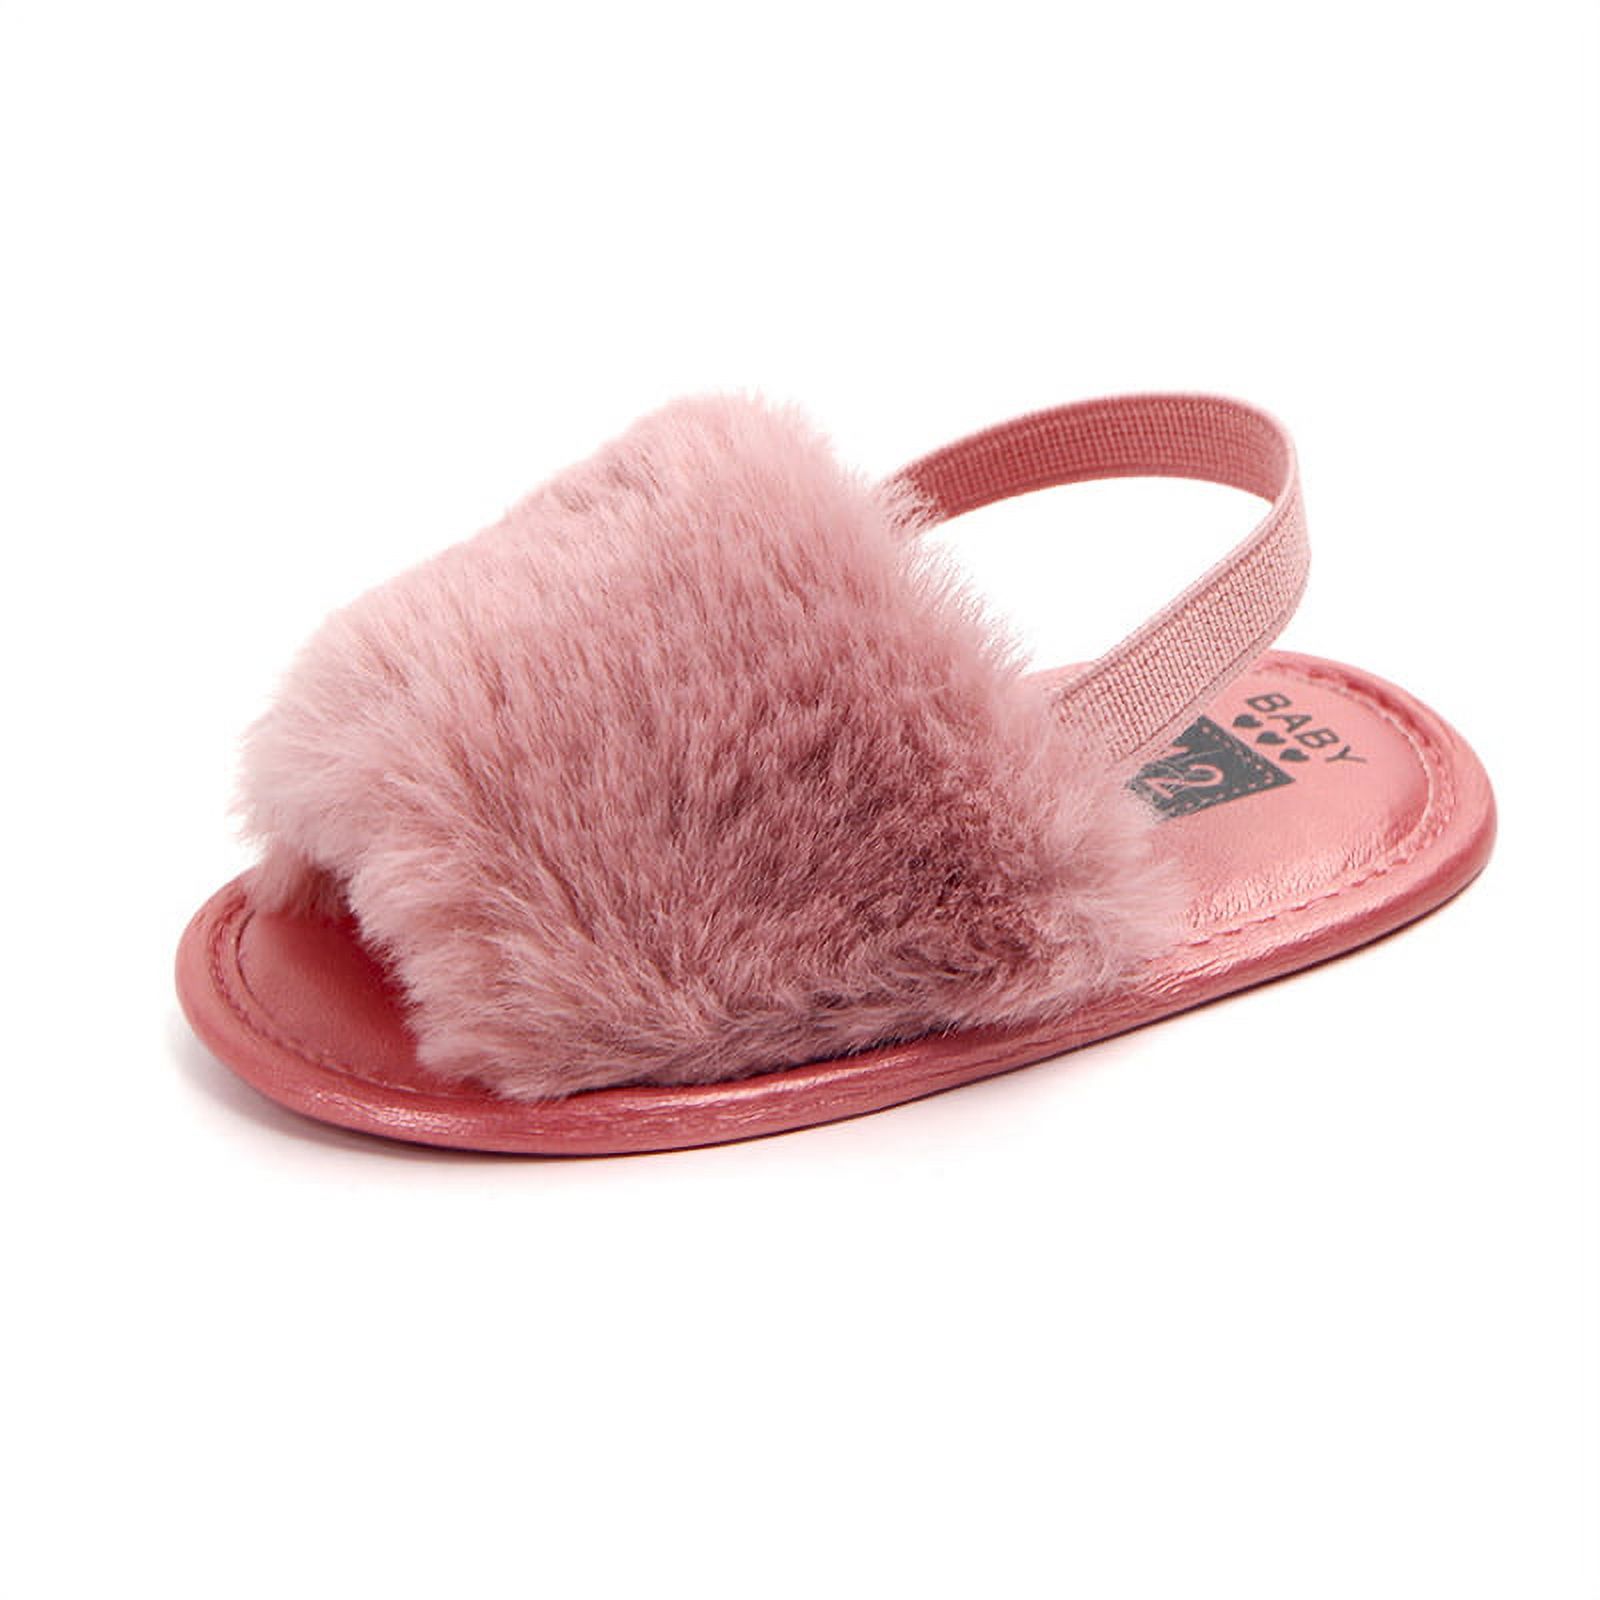 Baby Girls Summer Sandals Non Slip Soft Sole Infant Dress Shoes Newborn Toddler Furry Fur First Walker Crib Shoes House Slipper - image 1 of 5